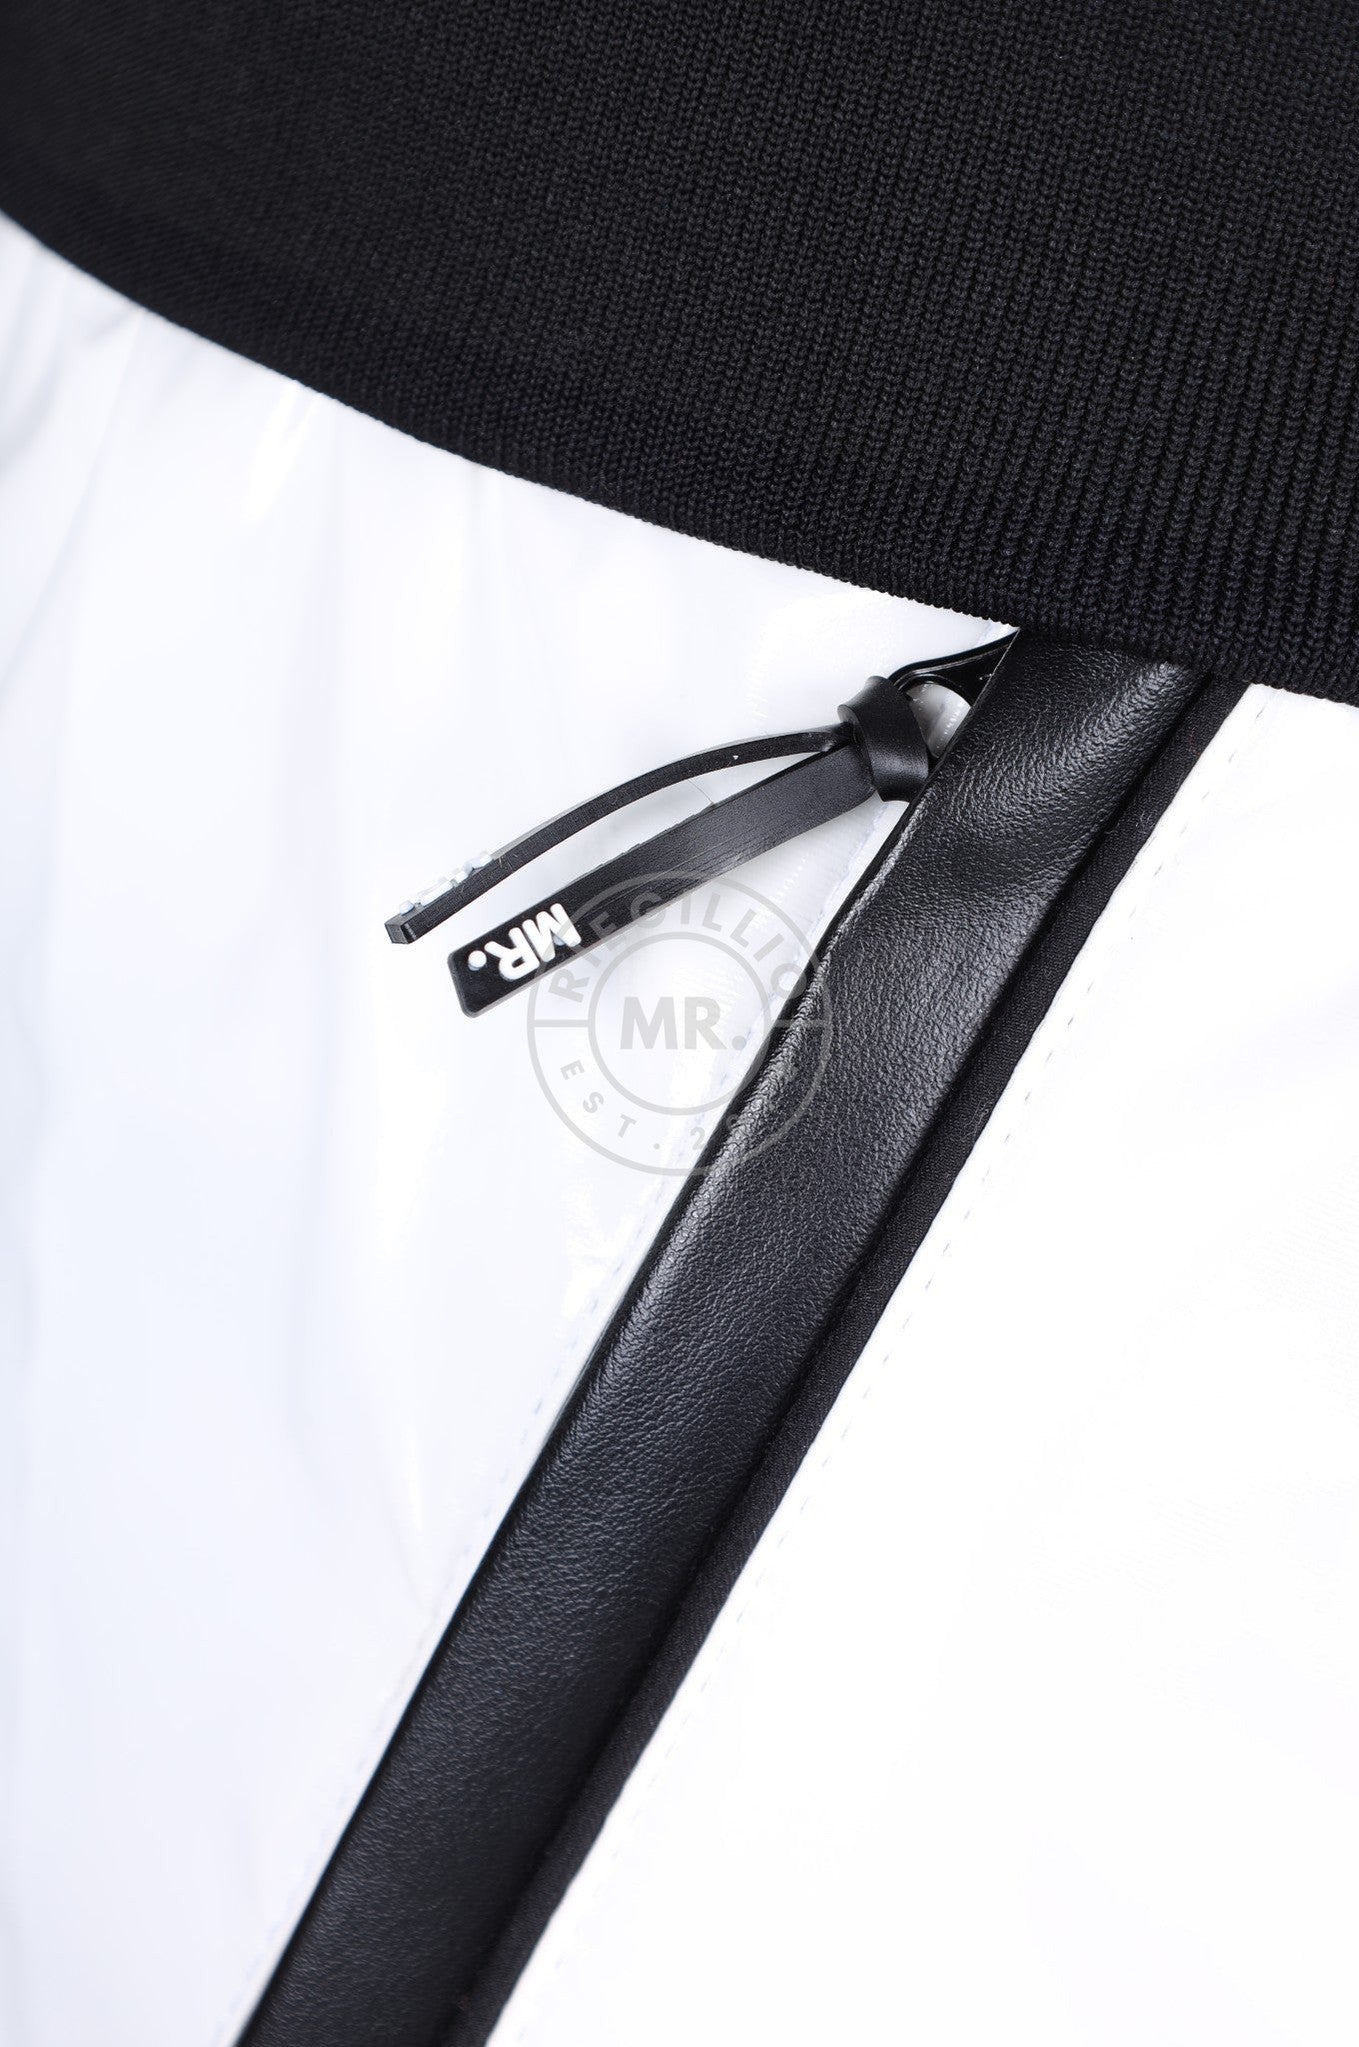 PVC 24 Tracksuit Pants - White with Black Piping at MR. Riegillio